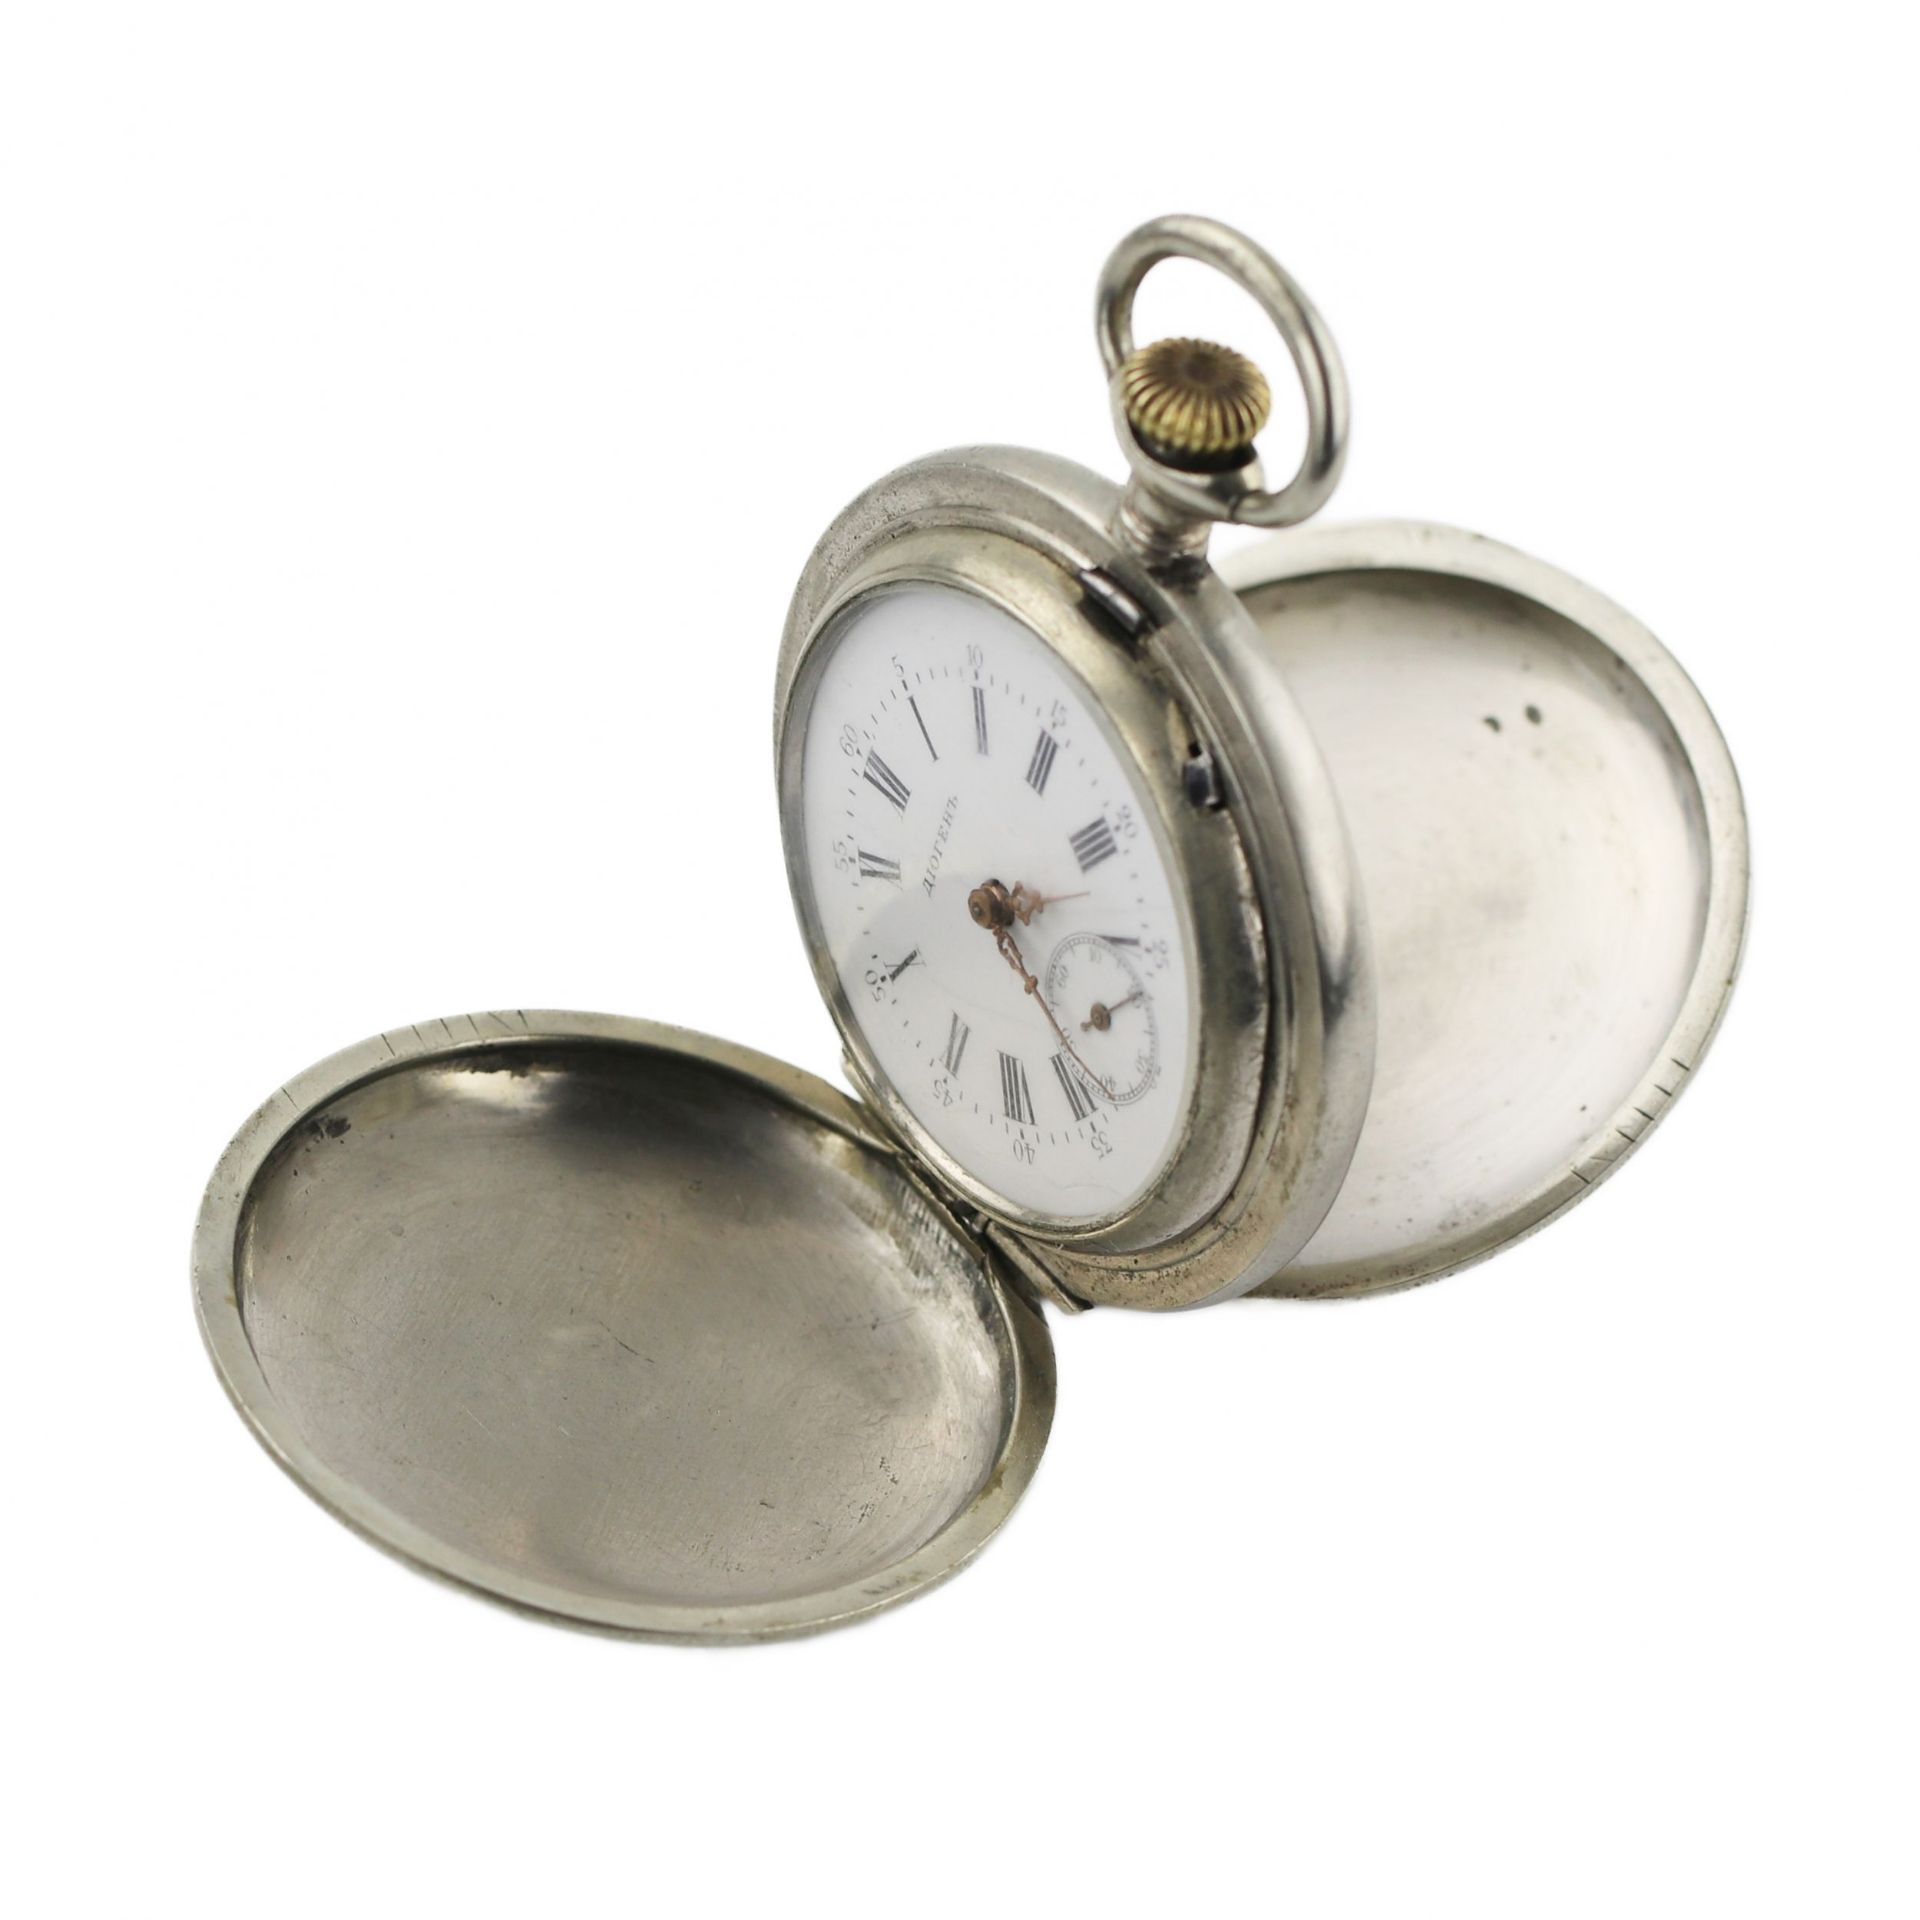 Russian pocket watch with blackened metal pattern. Diogenes company. Early 20th century. - Image 5 of 5